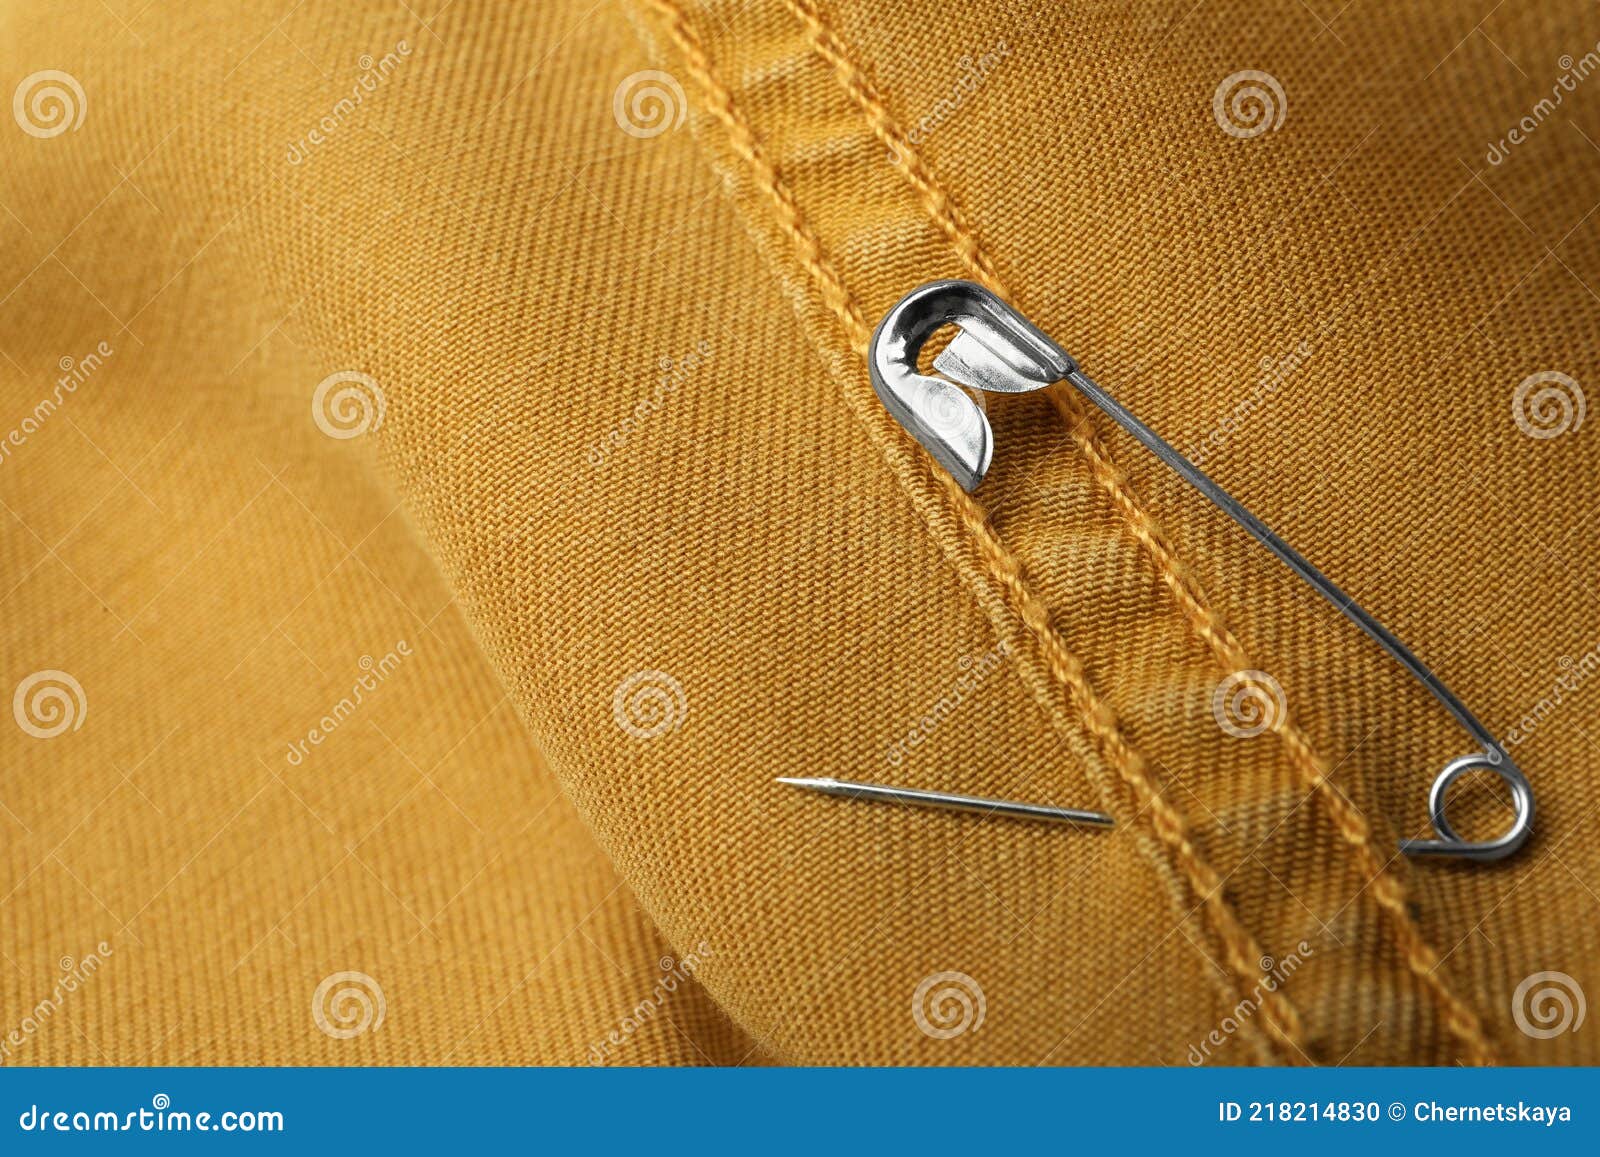 Closeup View of Metal Safety Pin on Clothing Stock Photo - Image of  material, garment: 218214830